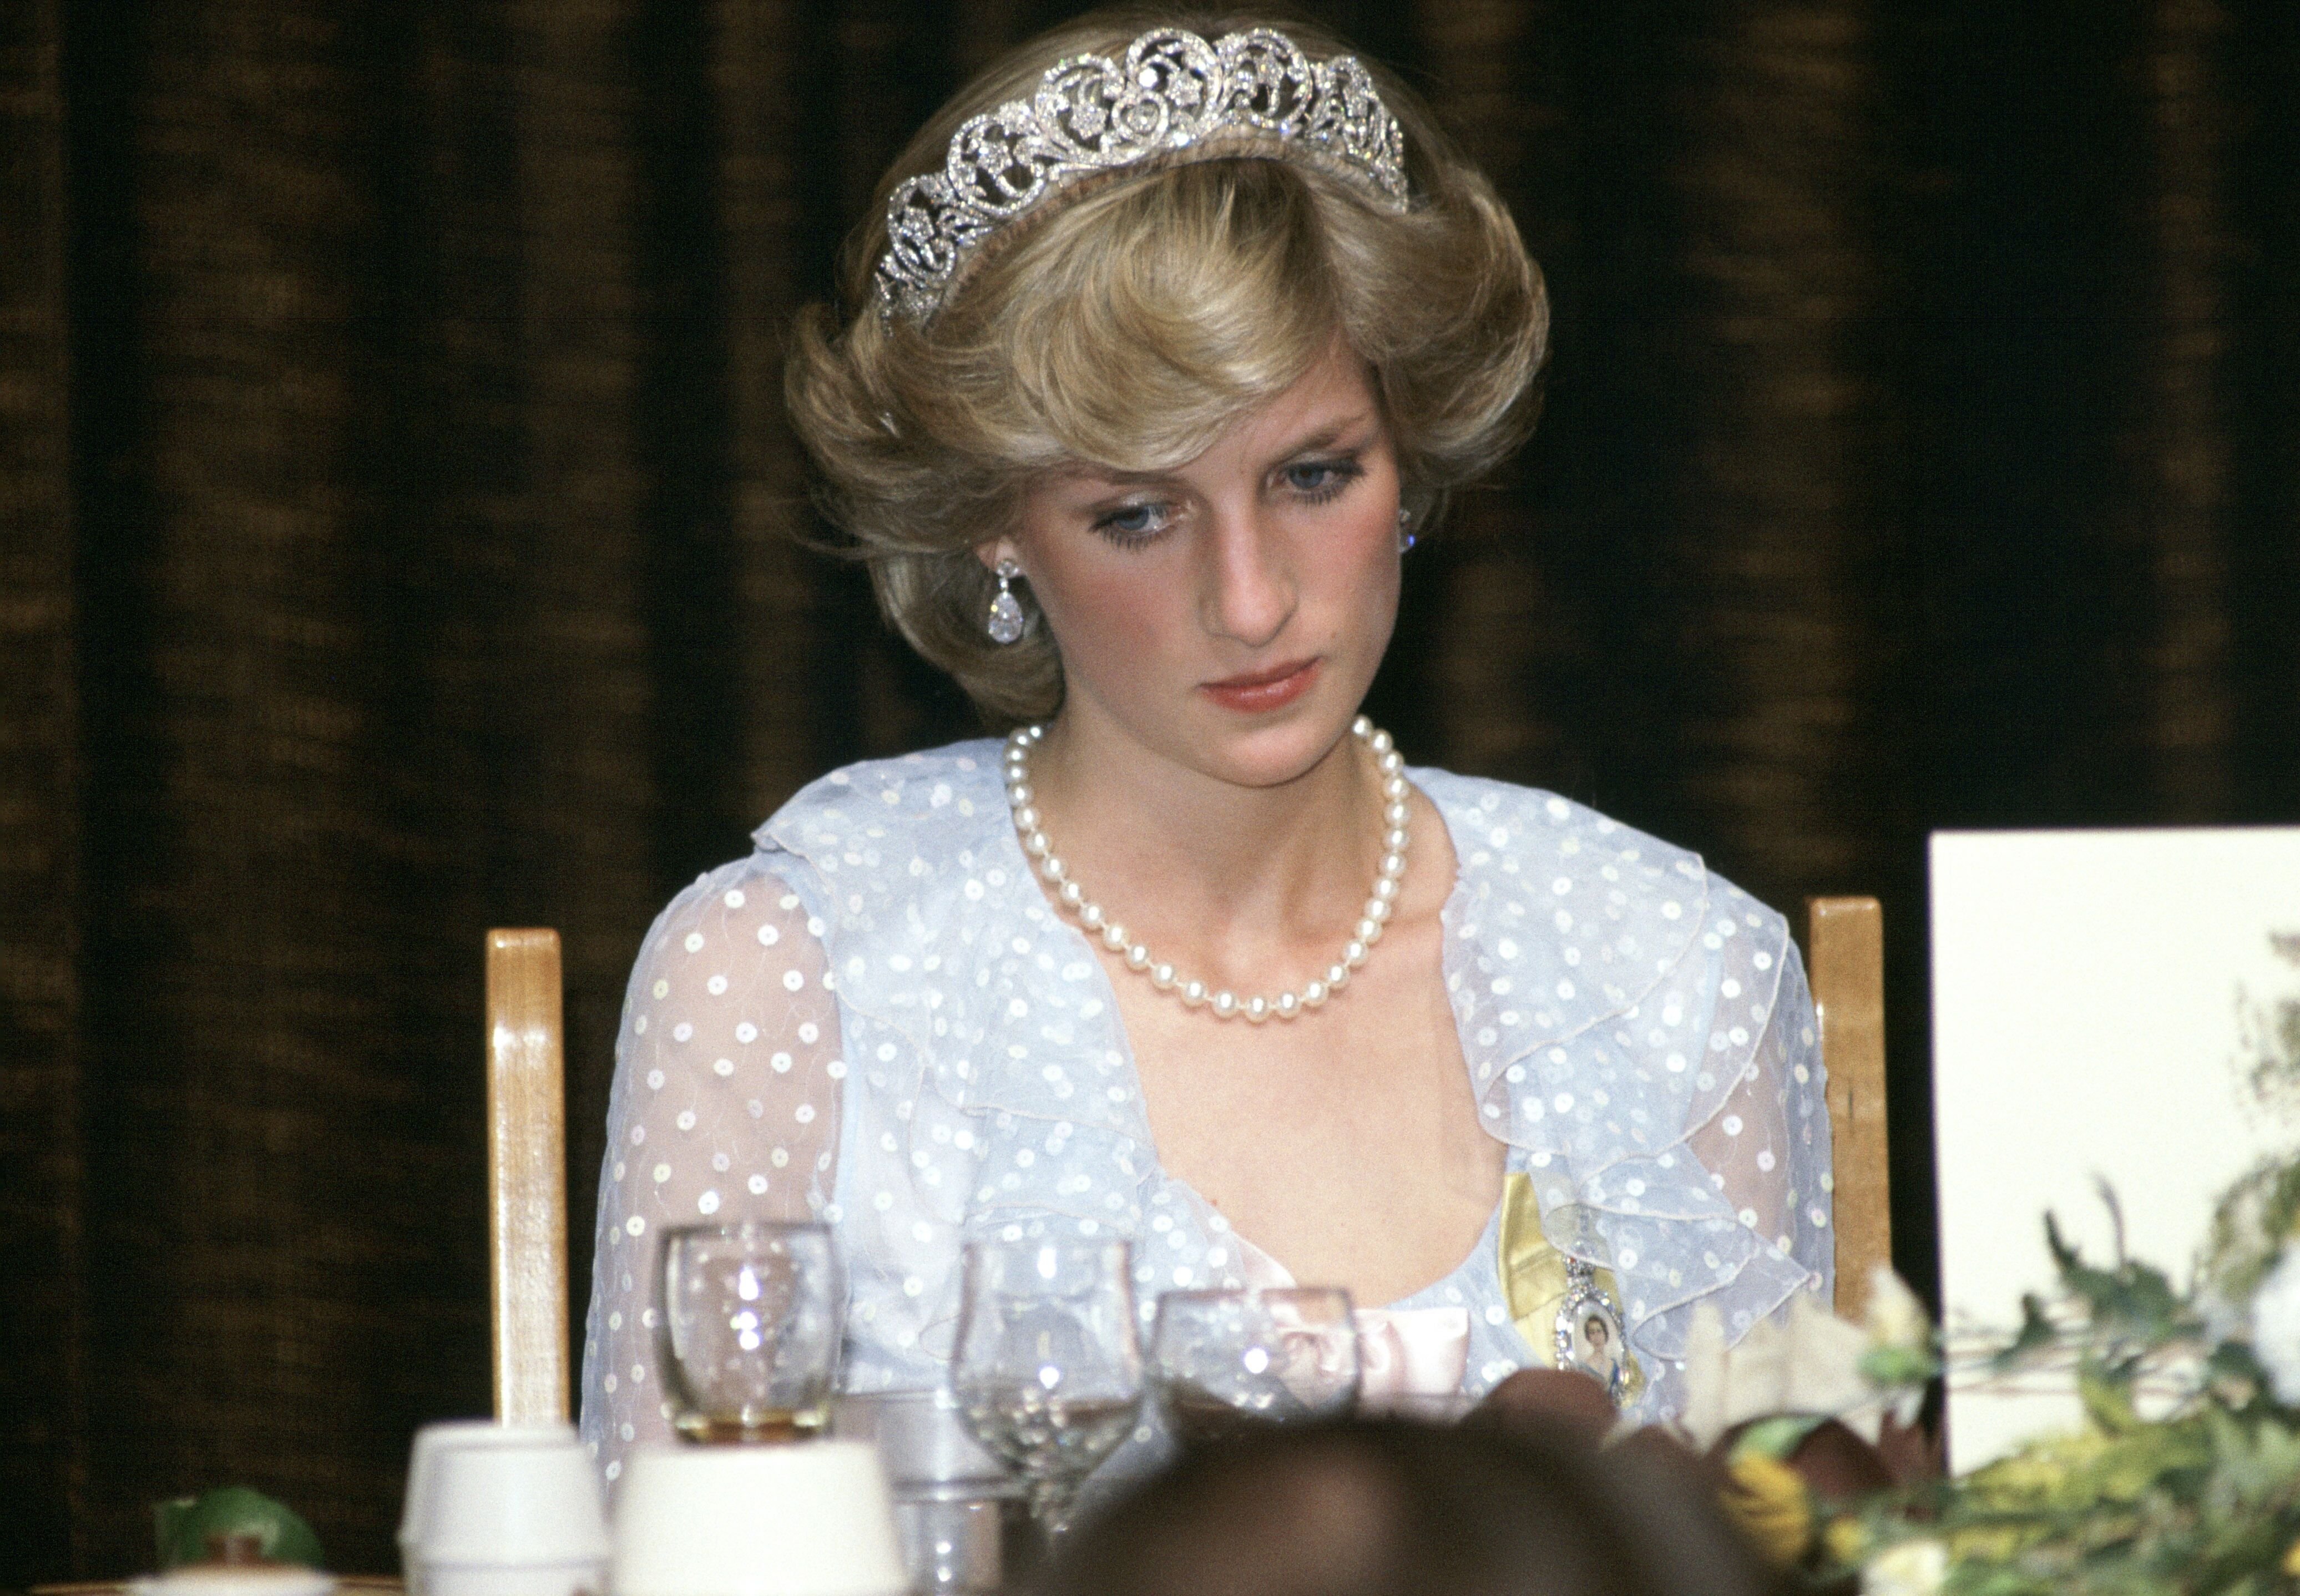 Diana Princess of Wales at a banquet in New Zealand on April 20| Source: Getty Images